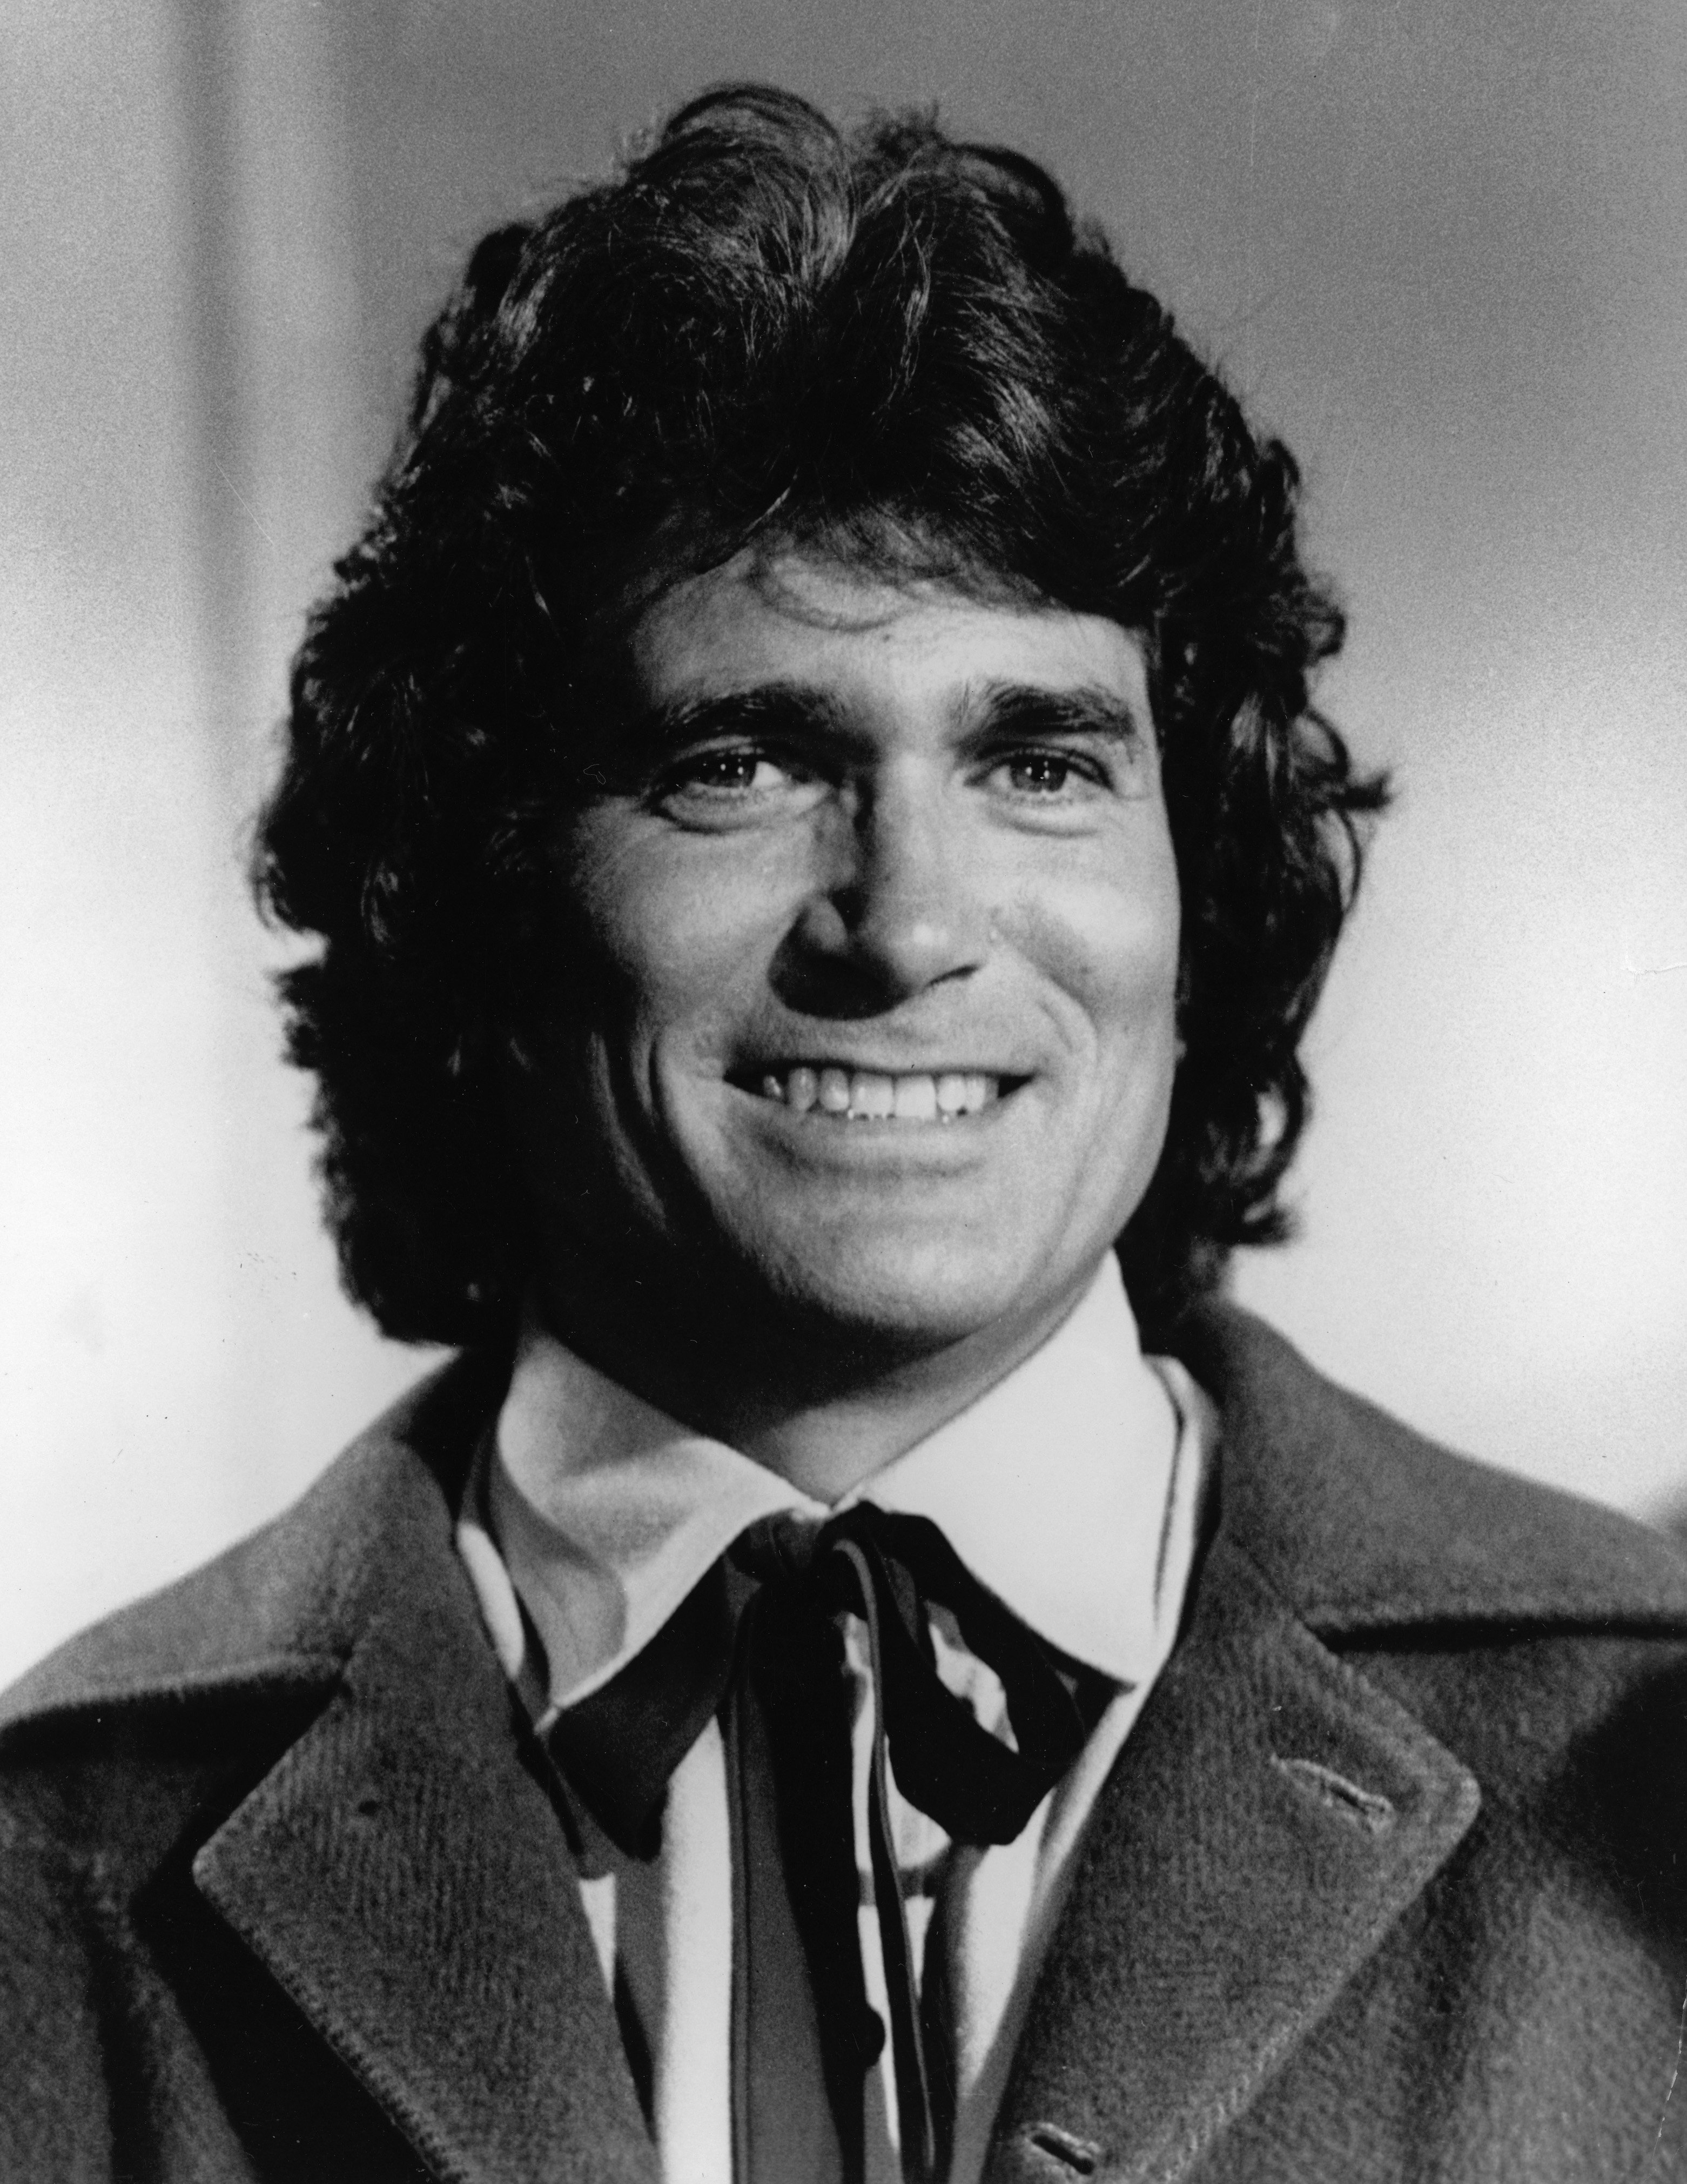 Headshot of American actor Michael Landon smiling in costume from the television series, "The Little House On The Prairie." | Source: Getty Images.